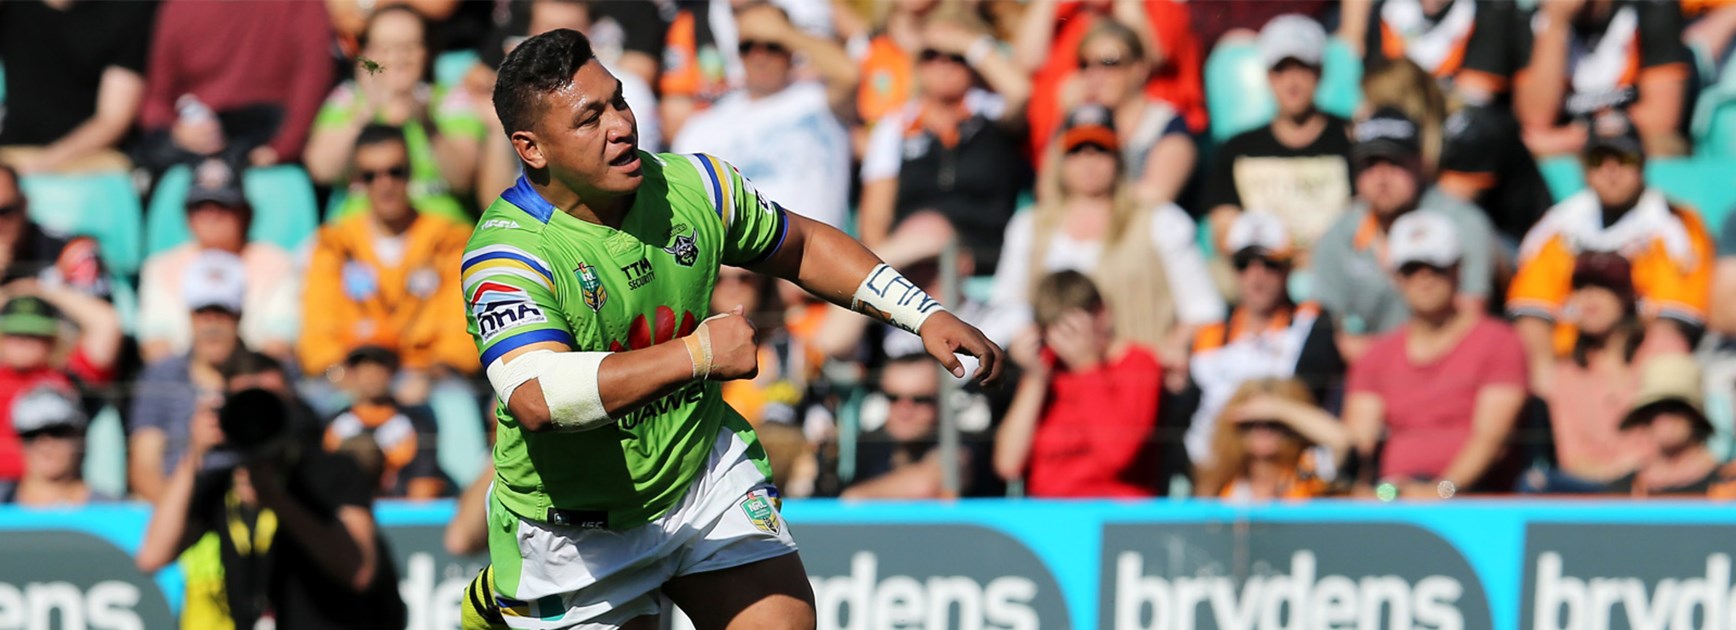 Josh Papalii celebrates a try against the Tigers in Round 26.